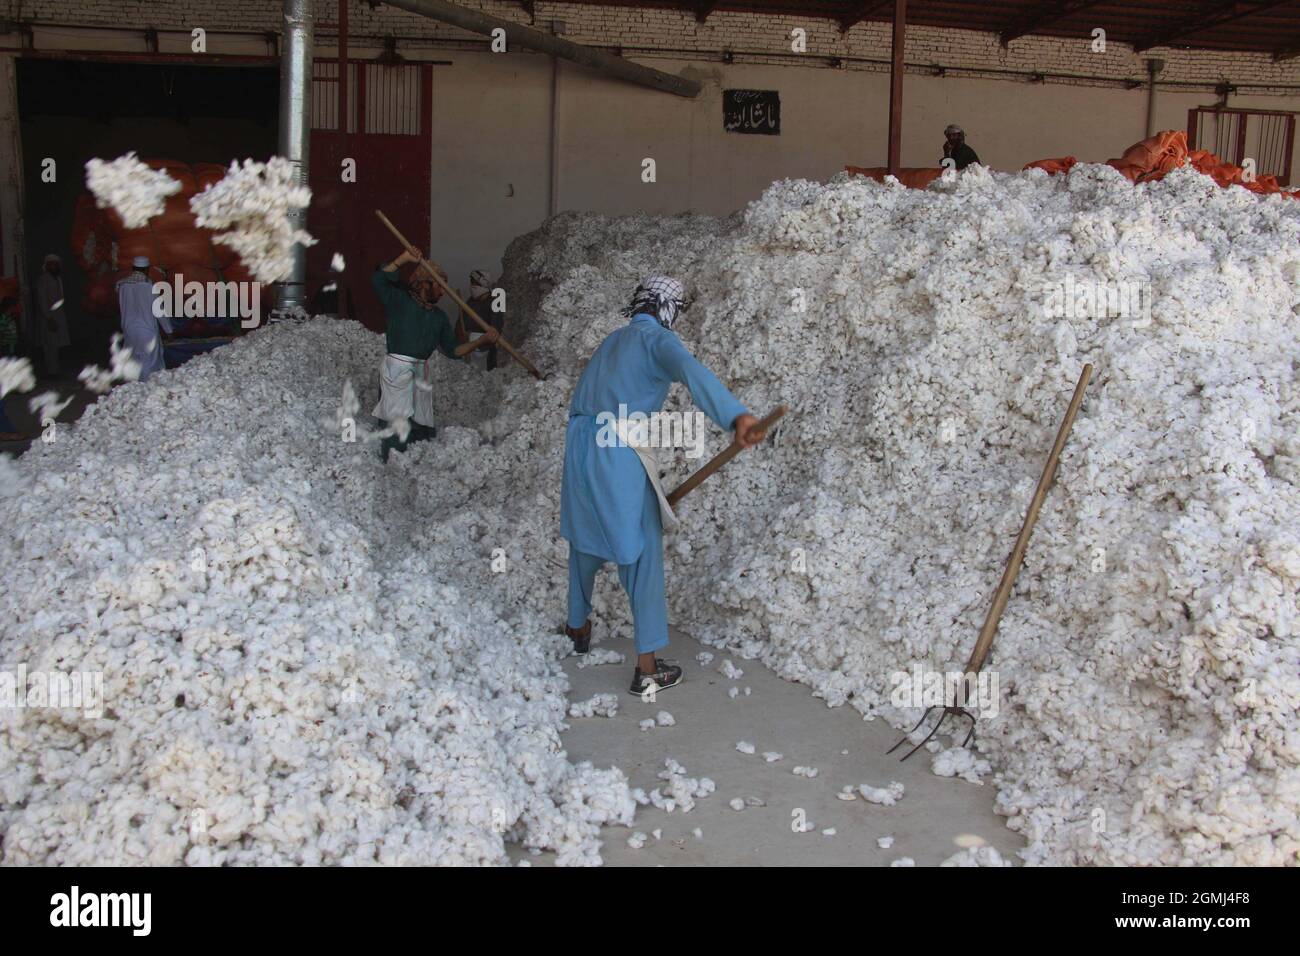 Kunduz, Afghanistan. 19th Sep, 2021. Afghans work at a cotton processing  factory in Kunduz city, northern Afghanistan, Sept. 19, 2021. A war-damaged  cotton processing factory reopened on Sunday in Kunduz city, the